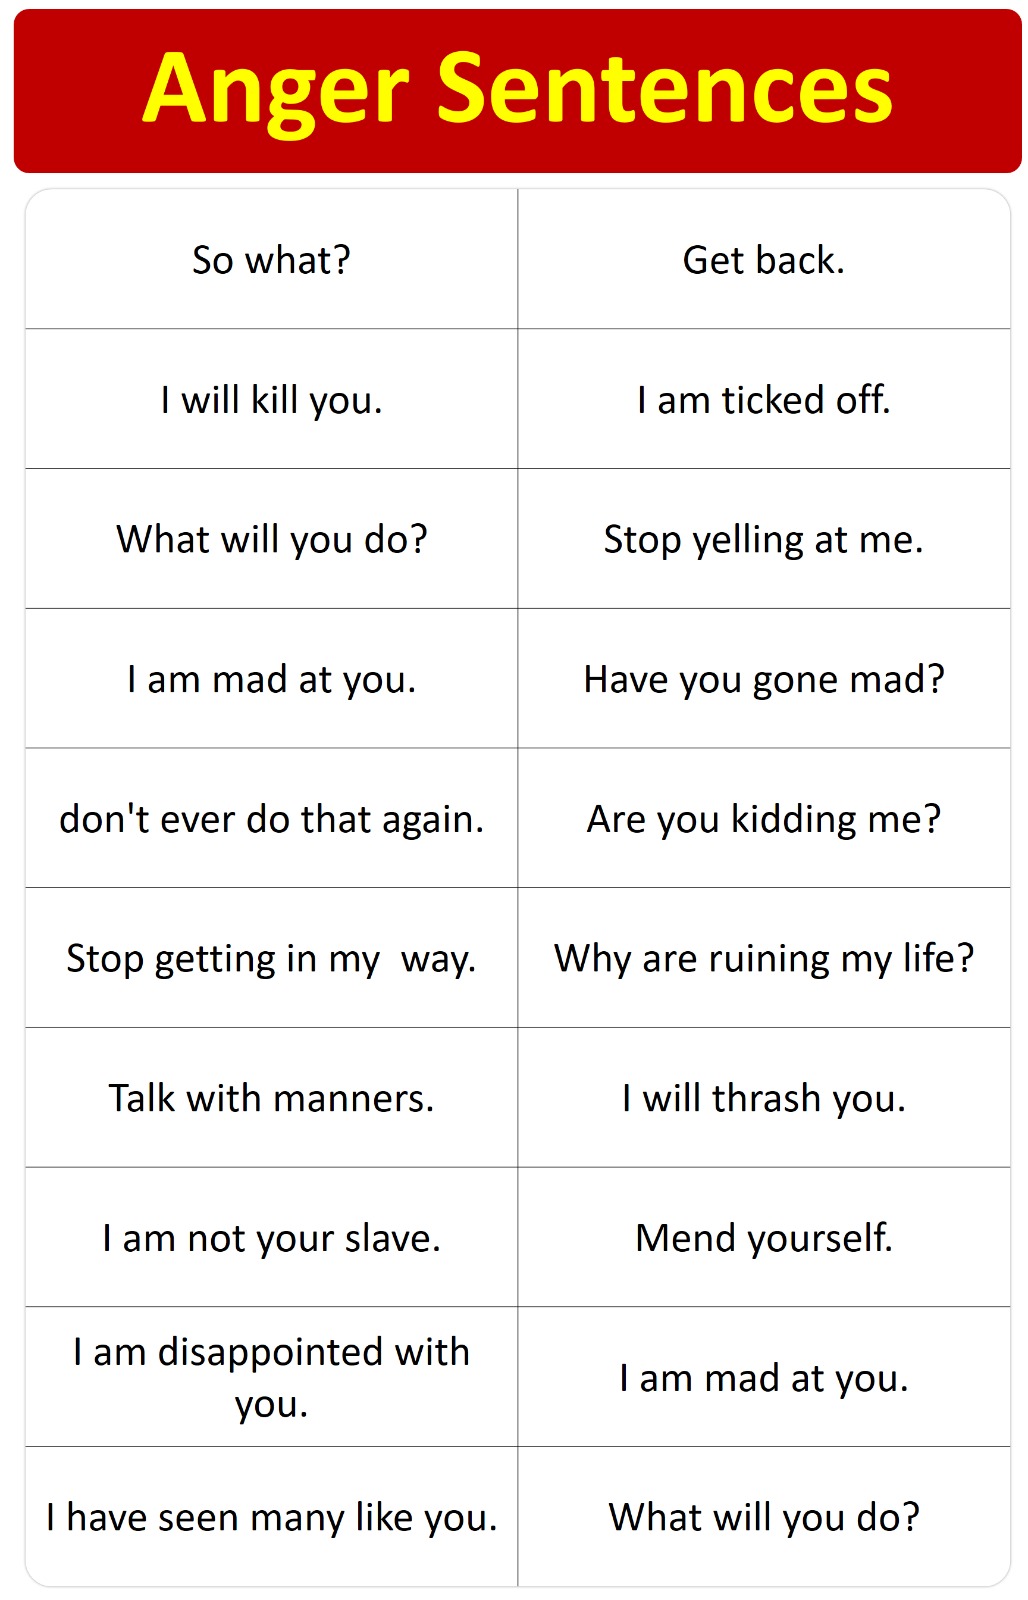 Anger Sentences used in Angry Mood